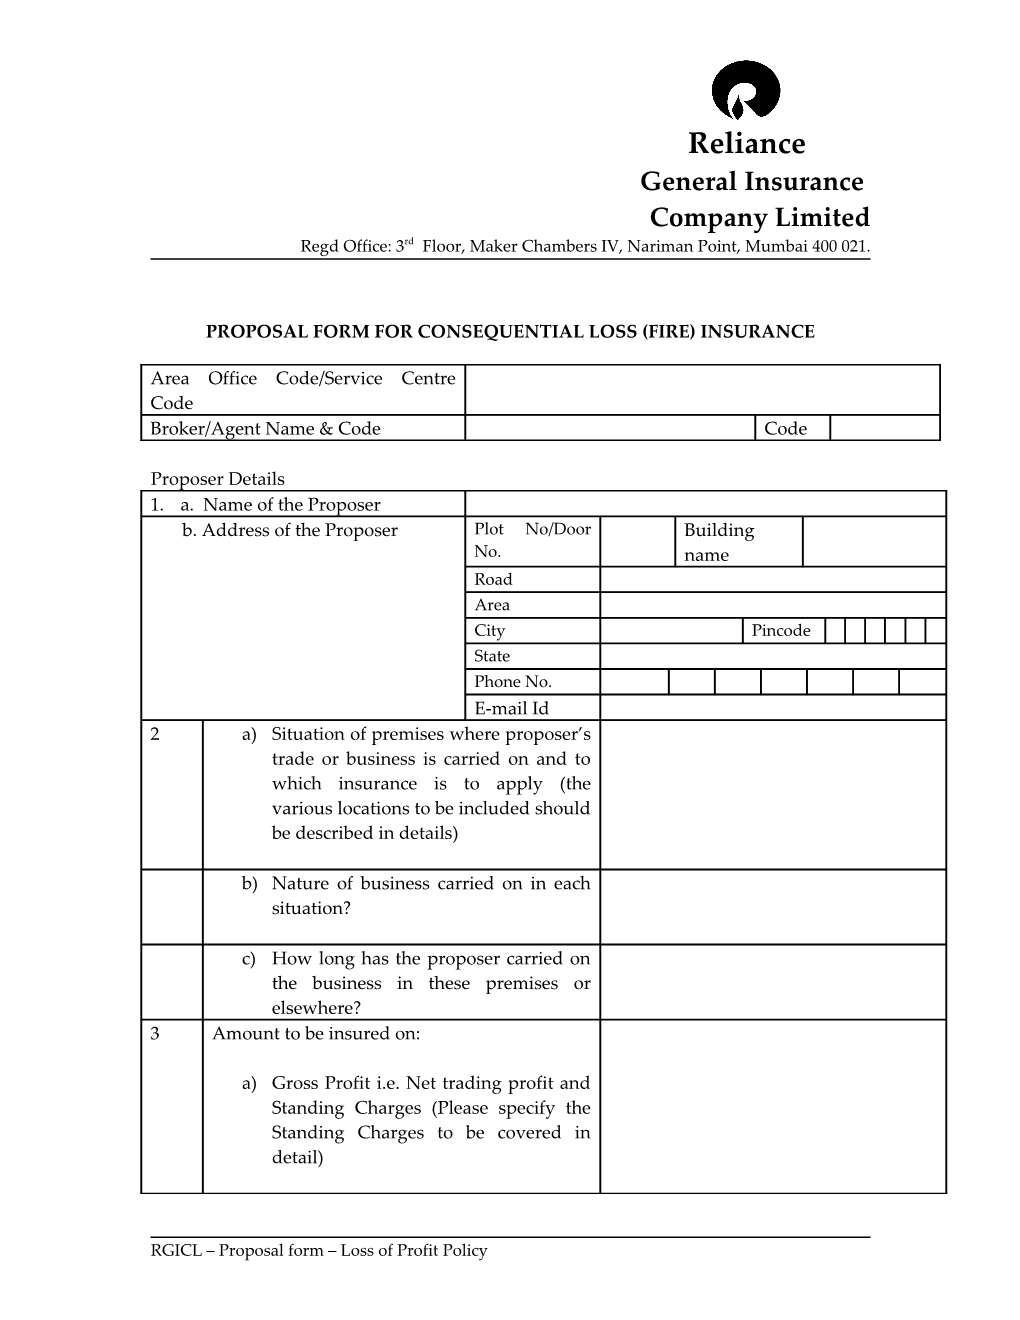 Proposal Form for Consequential Loss (Fire)